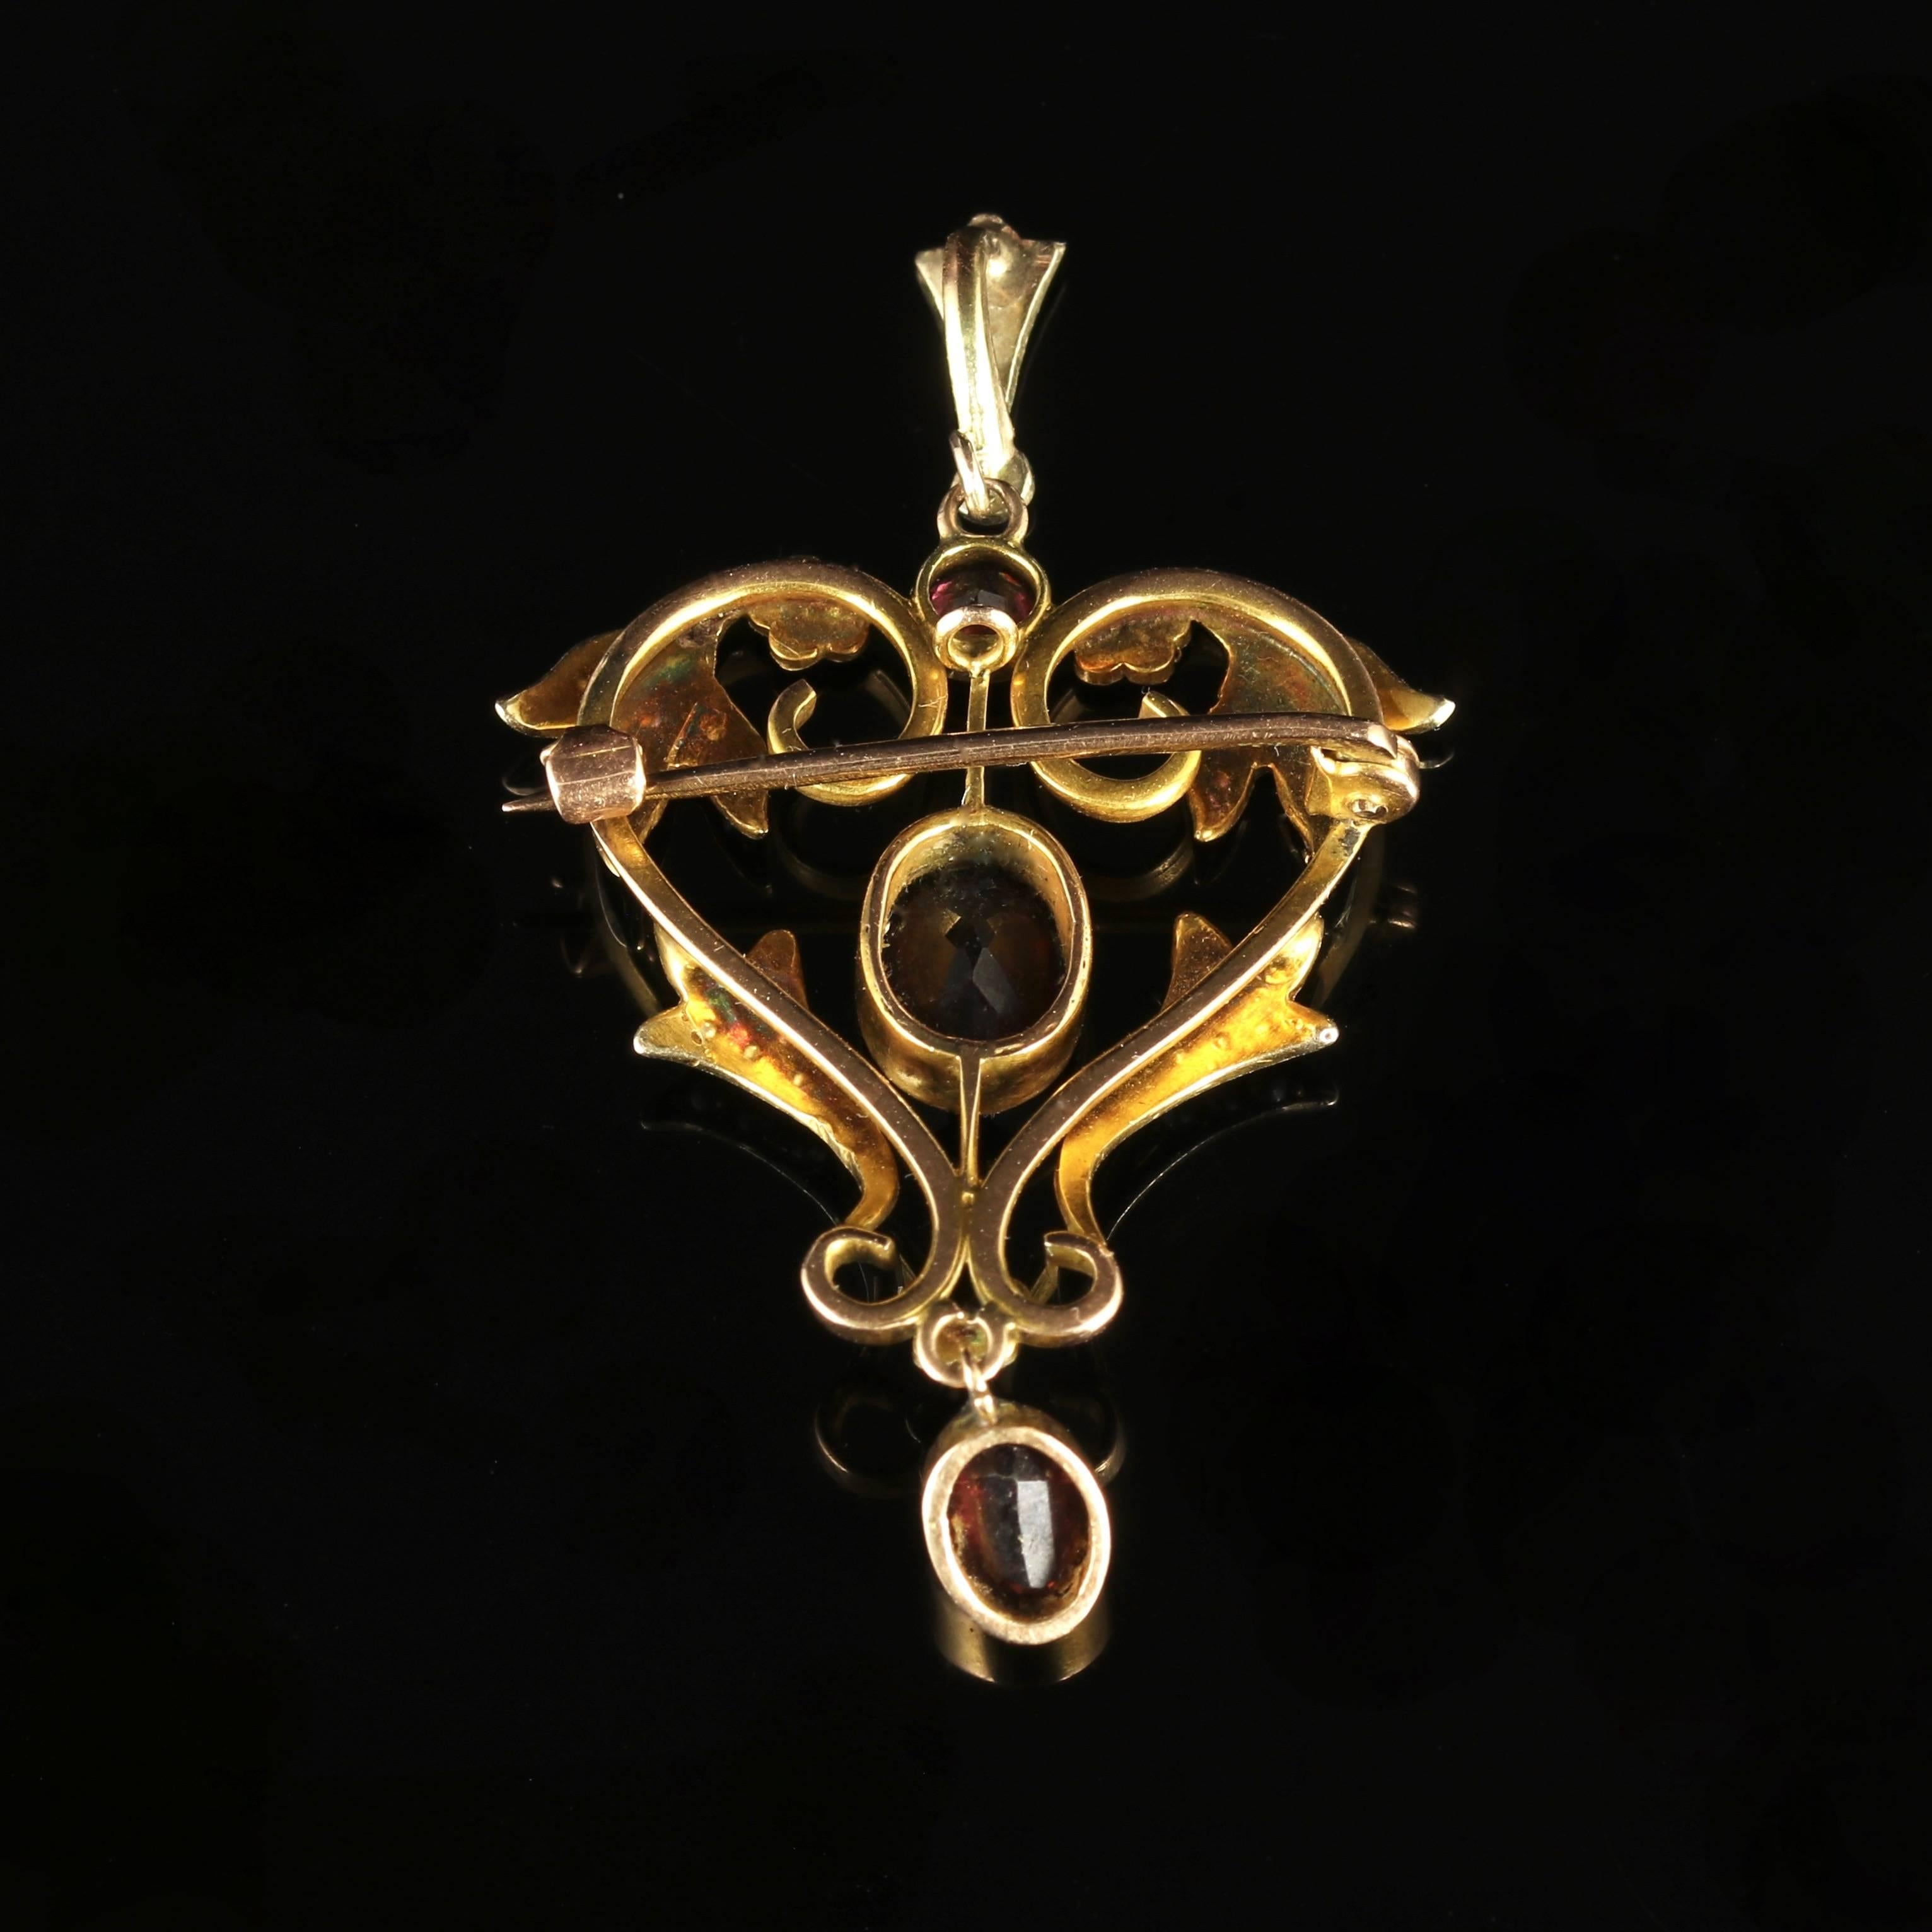 This fabulous 15ct Yellow Gold pendant brooch is Circa 1880.

The pendant has been tested with jewellers acid and this confirms it is 15ct Yellow Gold.

Set with a trilogy of Almandine Garnets.

Trilogy means past, present and future or those 3